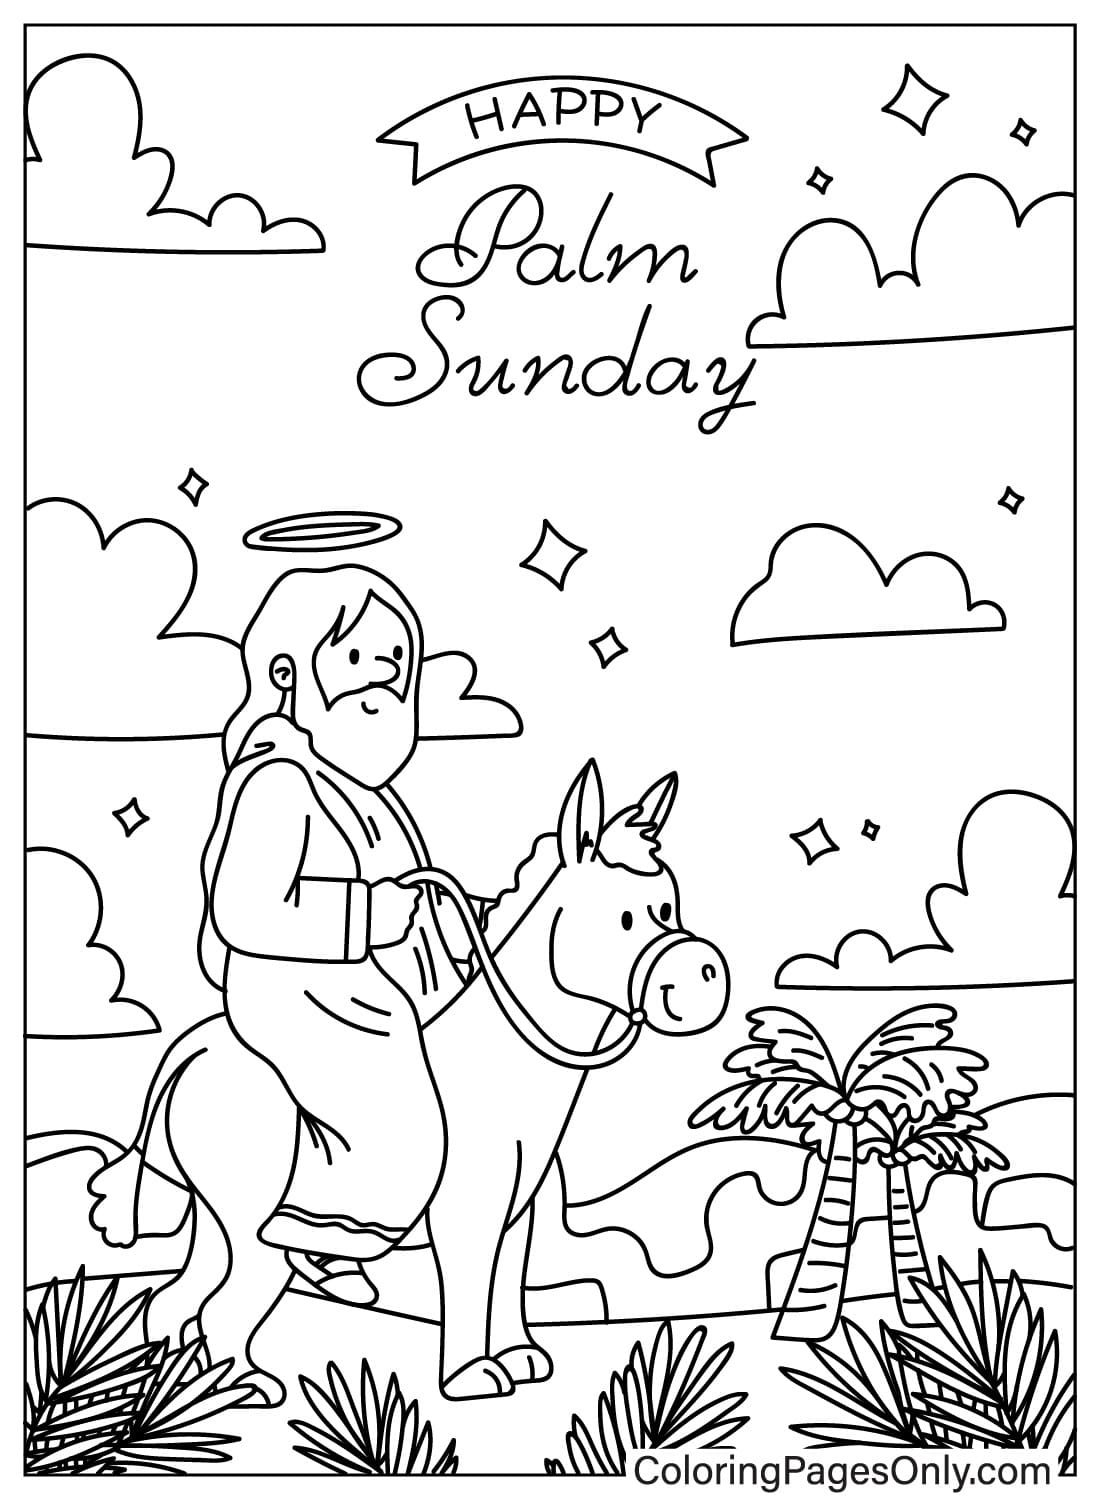 Coloring Page Palm Sunday from Palm Sunday